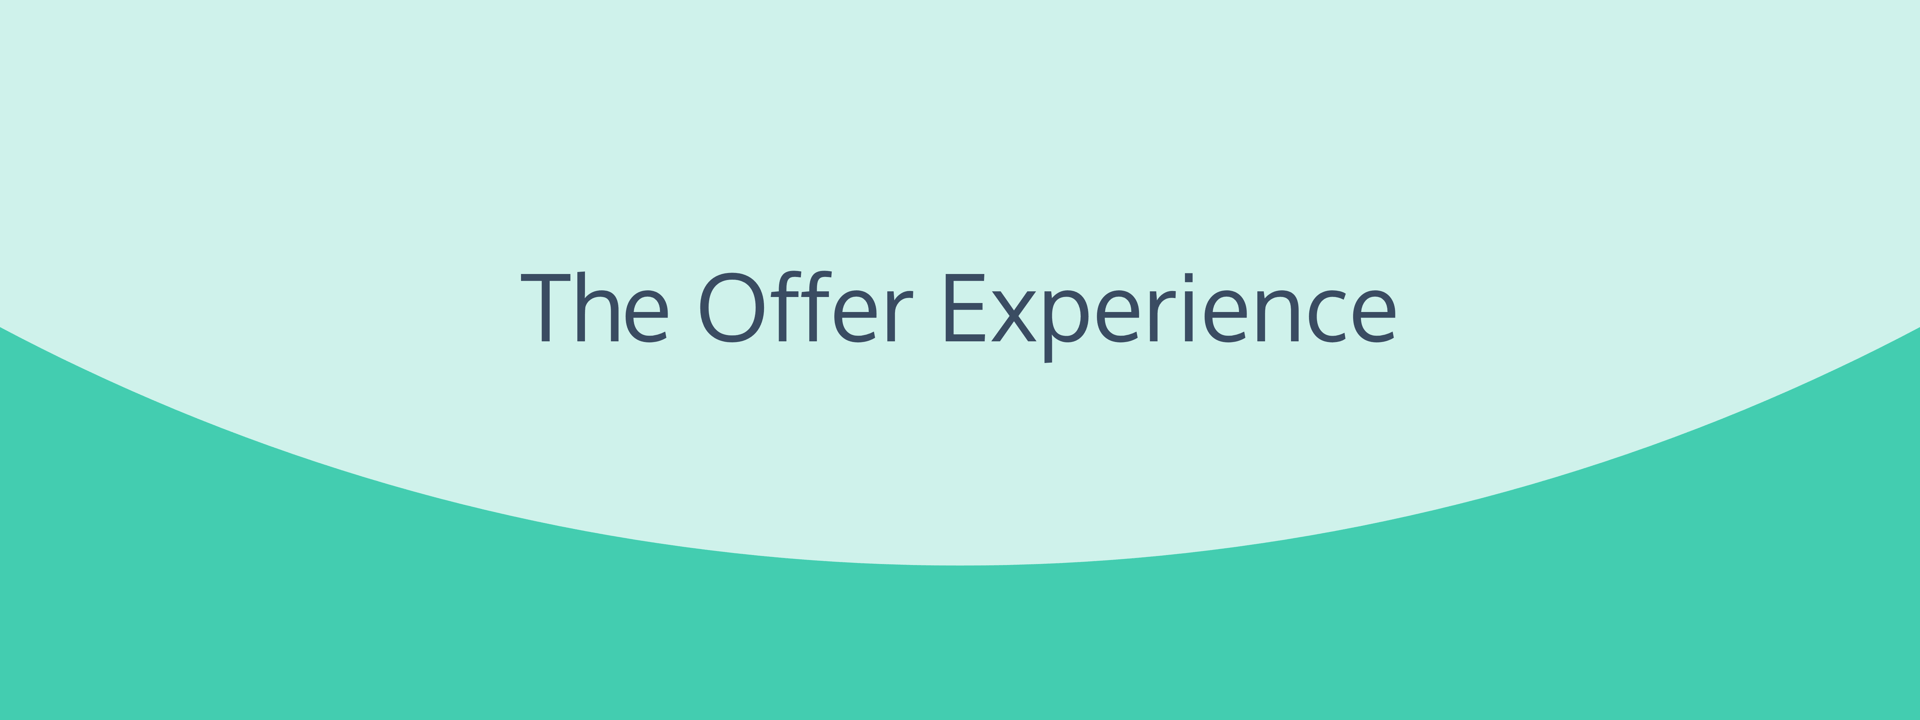 The Offer Experience